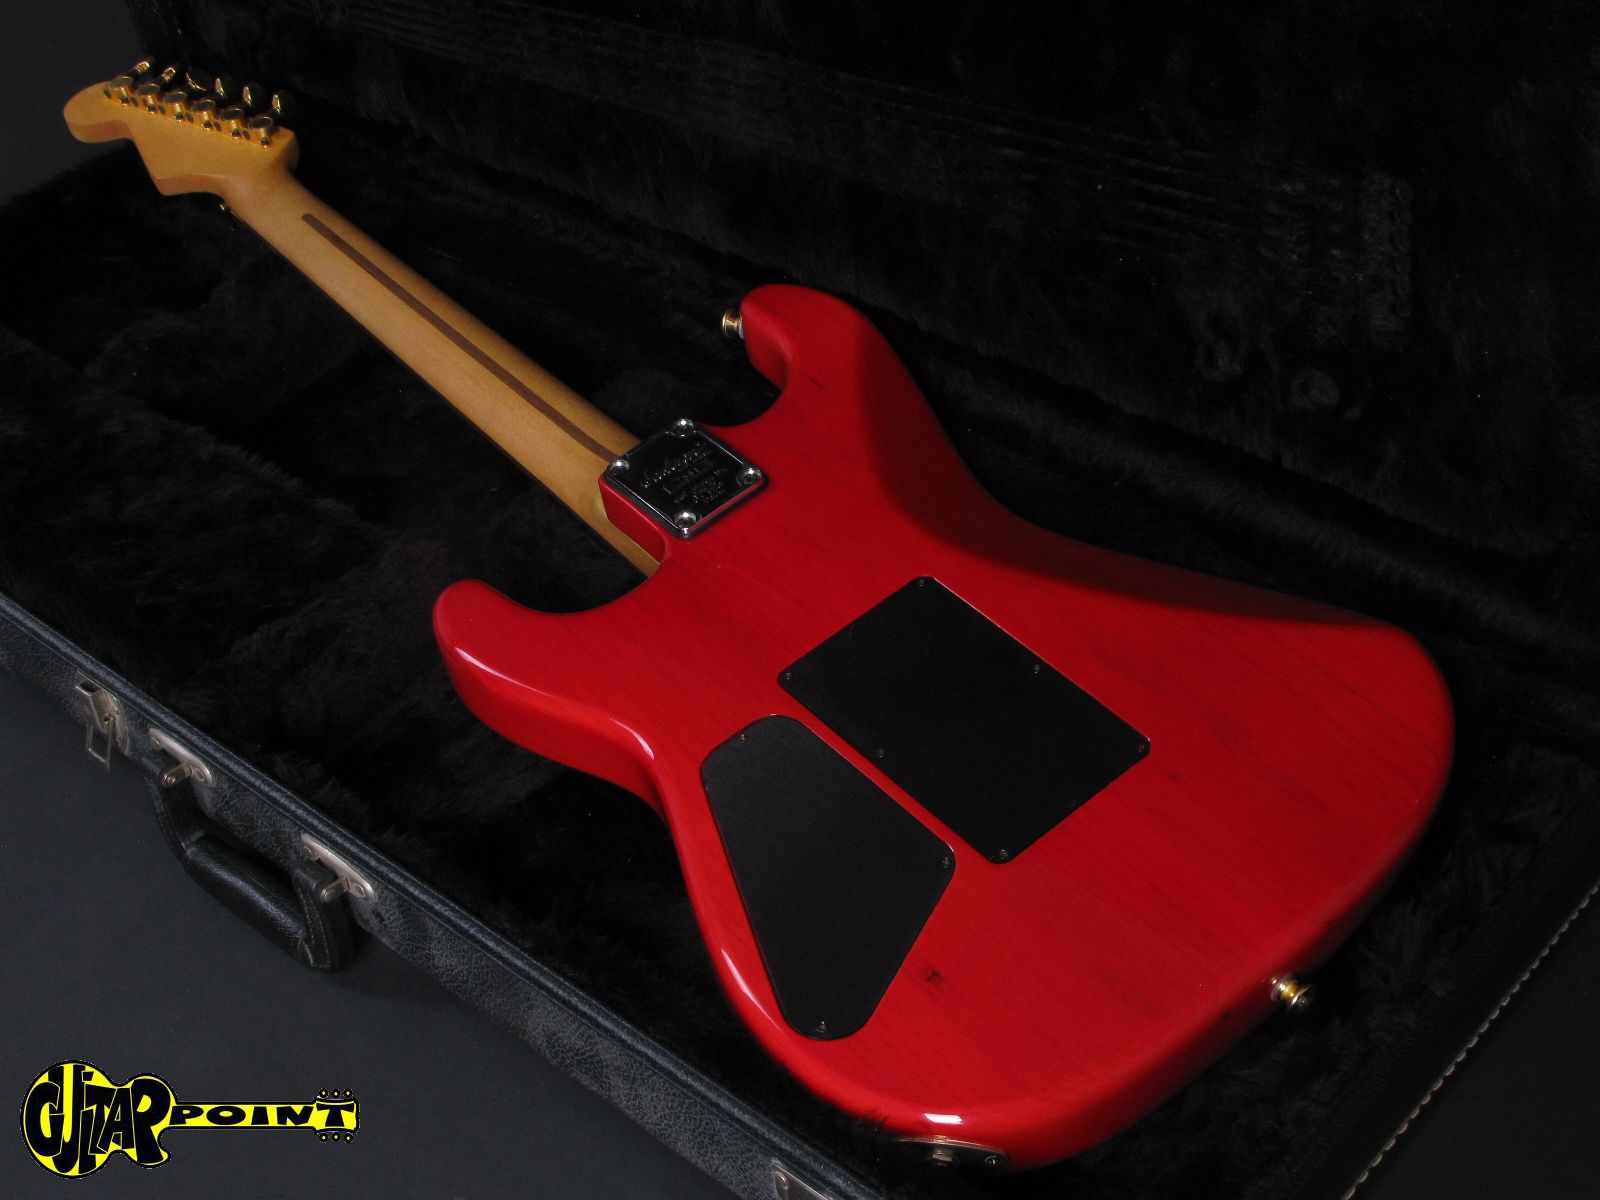 Charvel 1991 Limited Edition 1991 Trans Red Guitar For Sale GuitarPoint